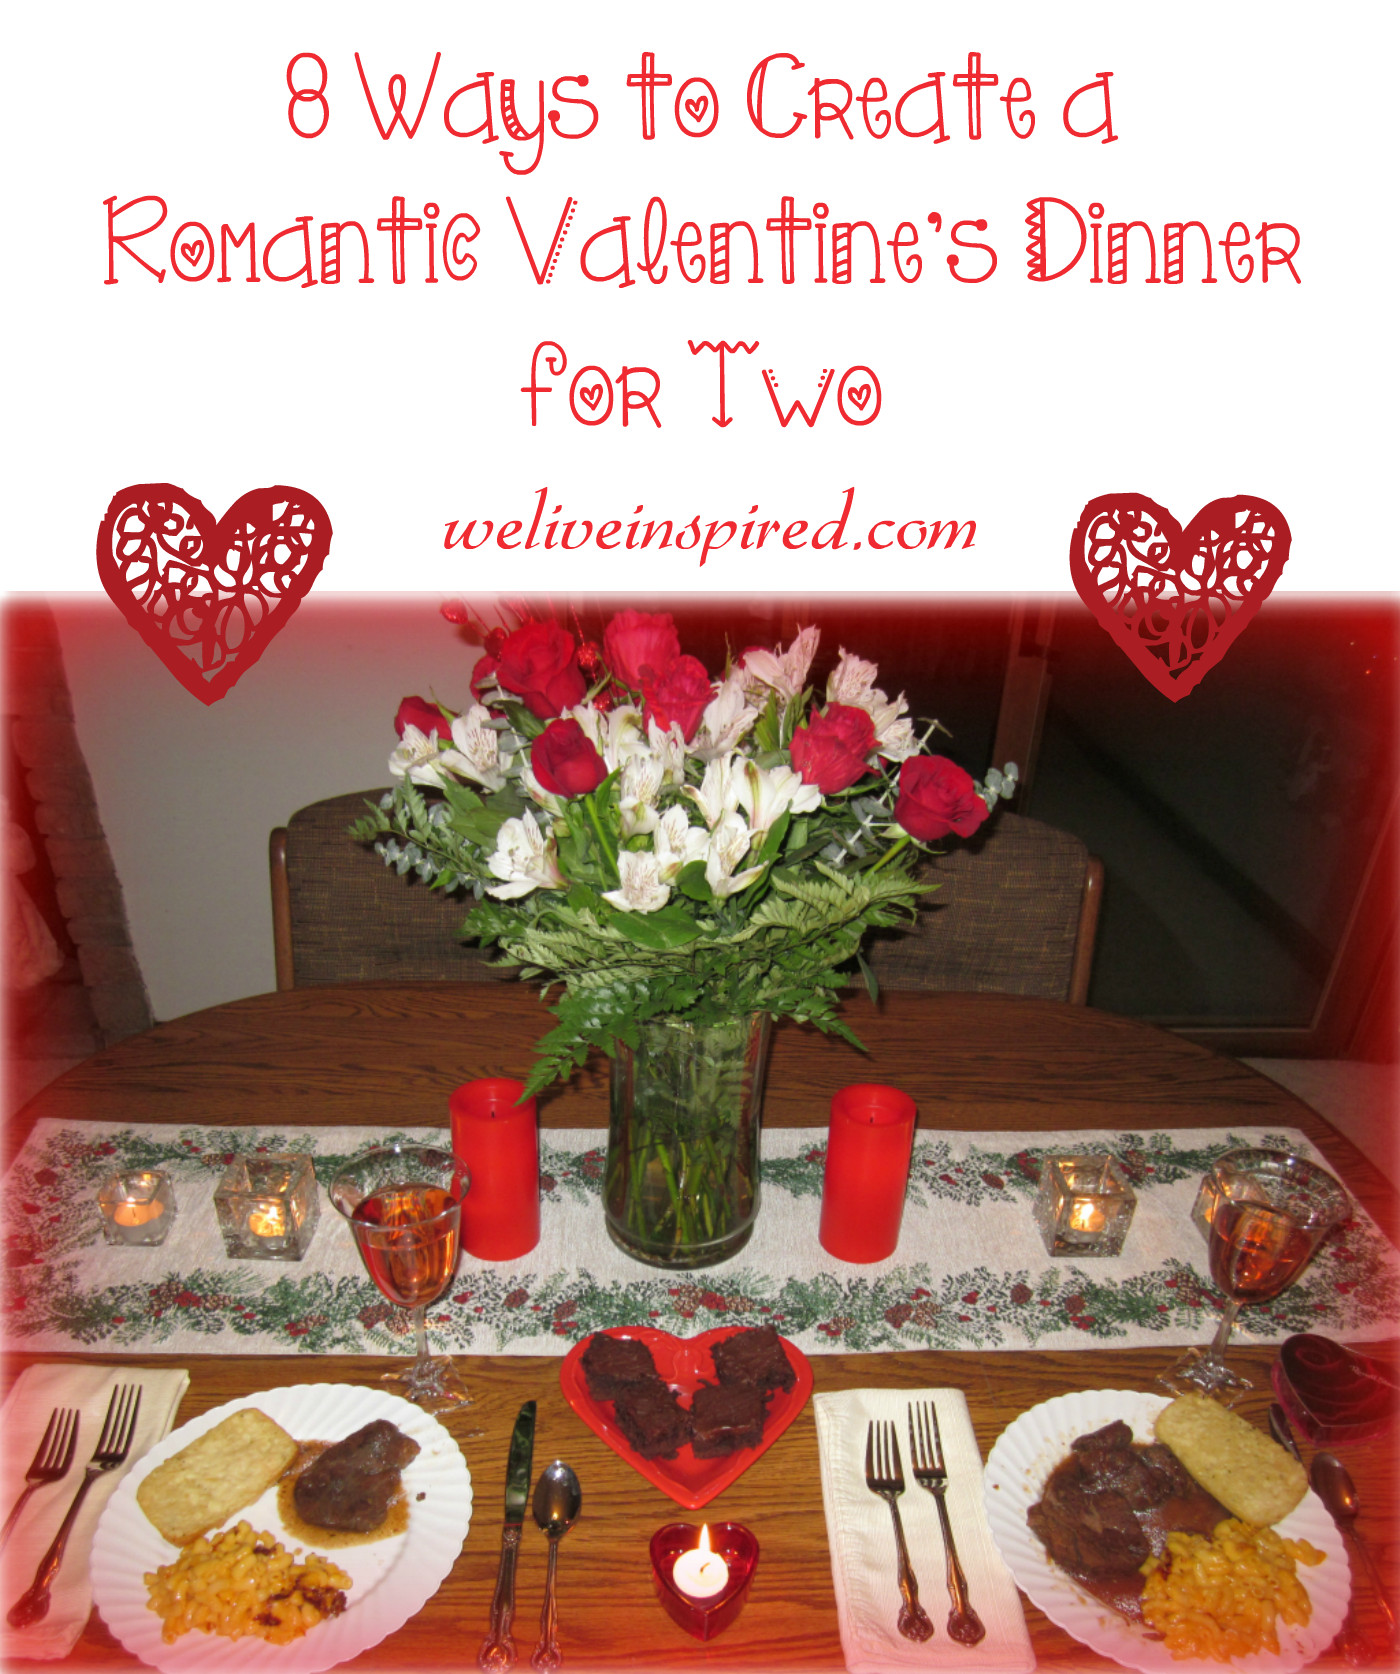 Romantic Valentines Dinners At Home
 8 Ways to Create a Romantic Valentine s Day Dinner for Two